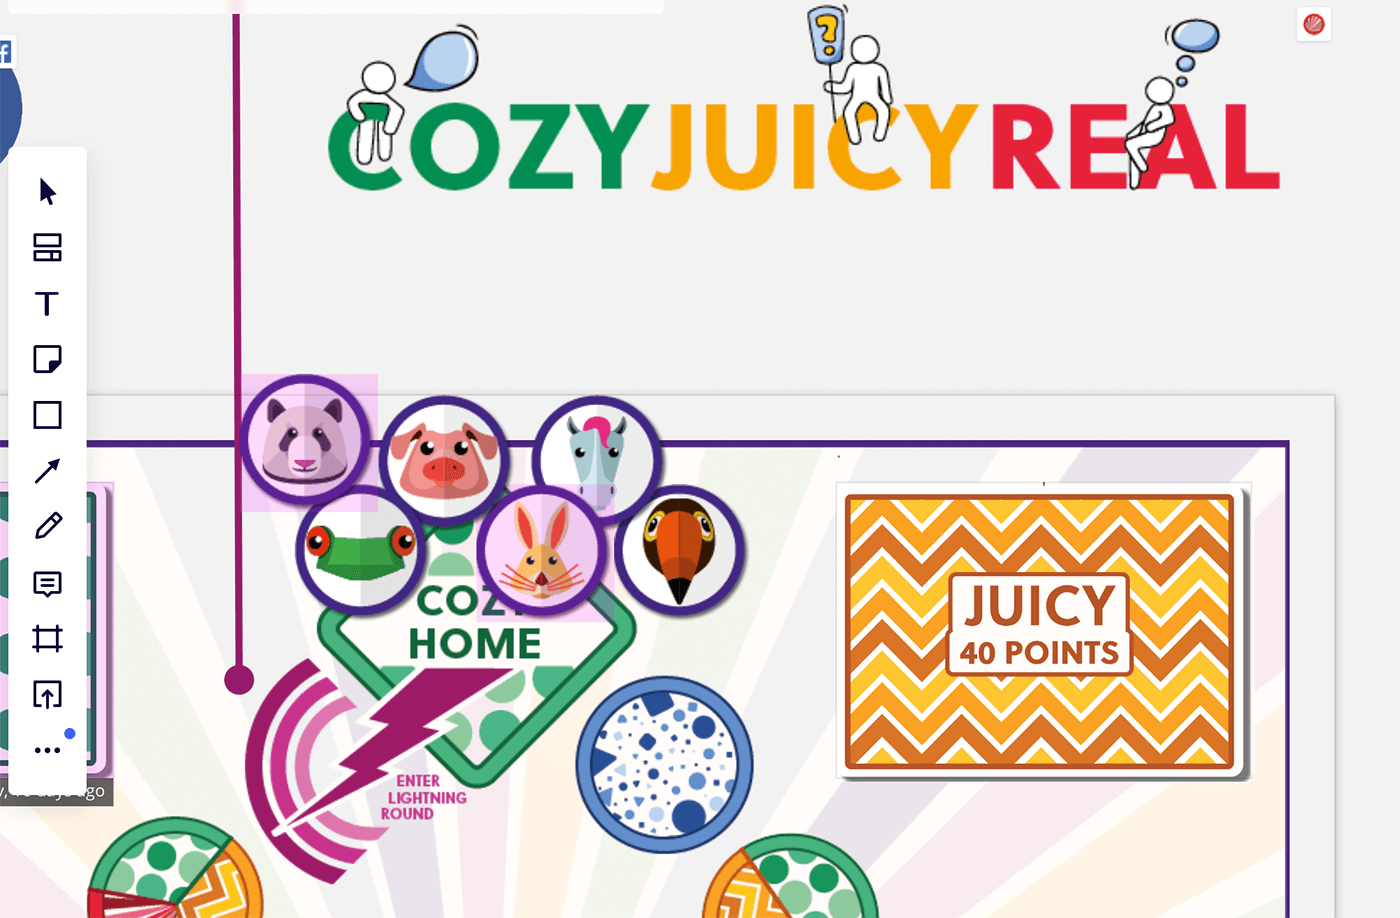 How the CozyJuicyReal game came to life in Miro